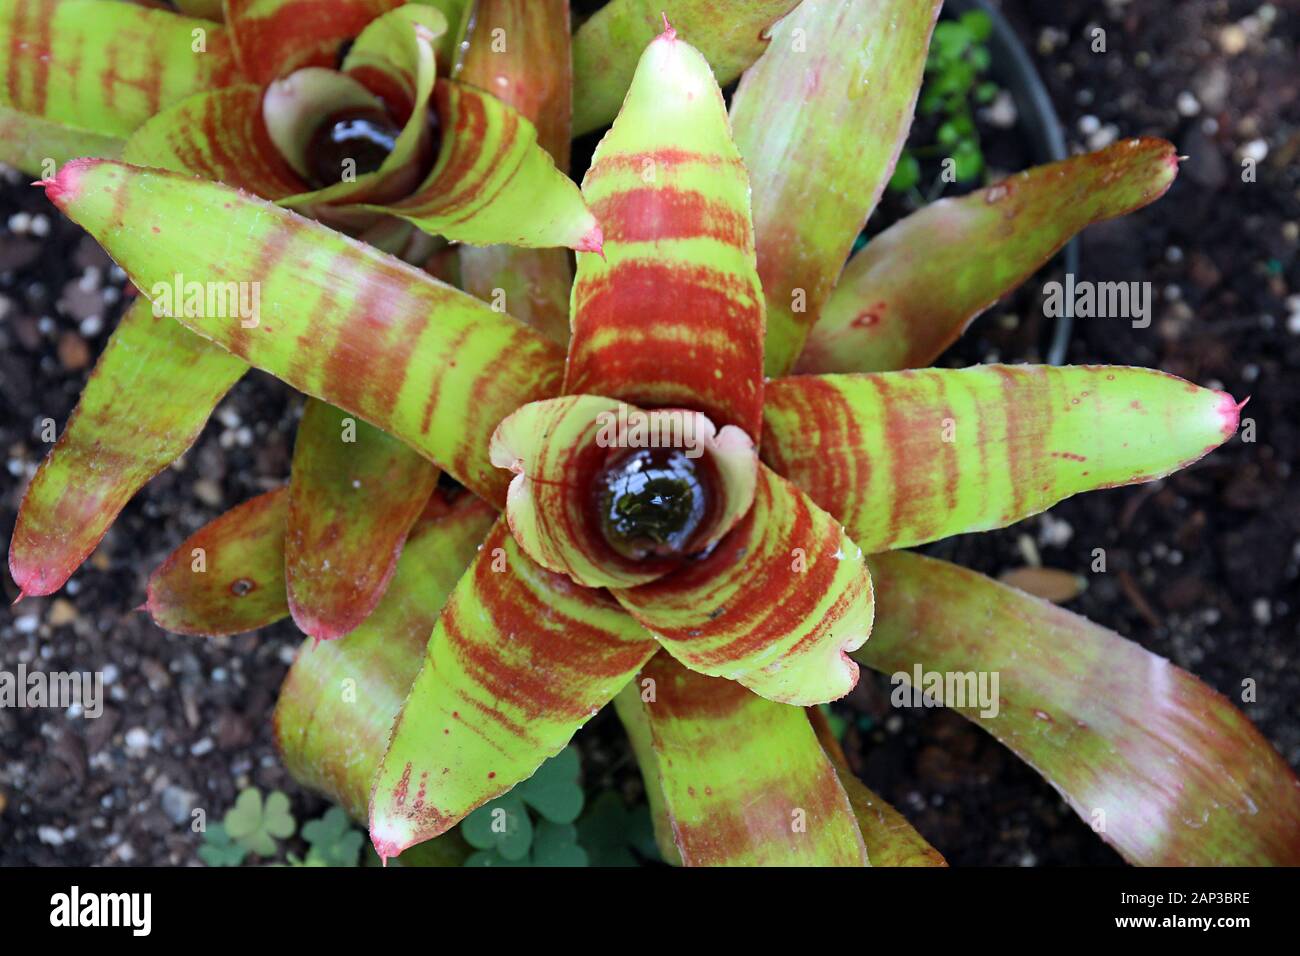 Close up of the center of a Bromeliad plant filled with water with red and green striped leaves Stock Photo